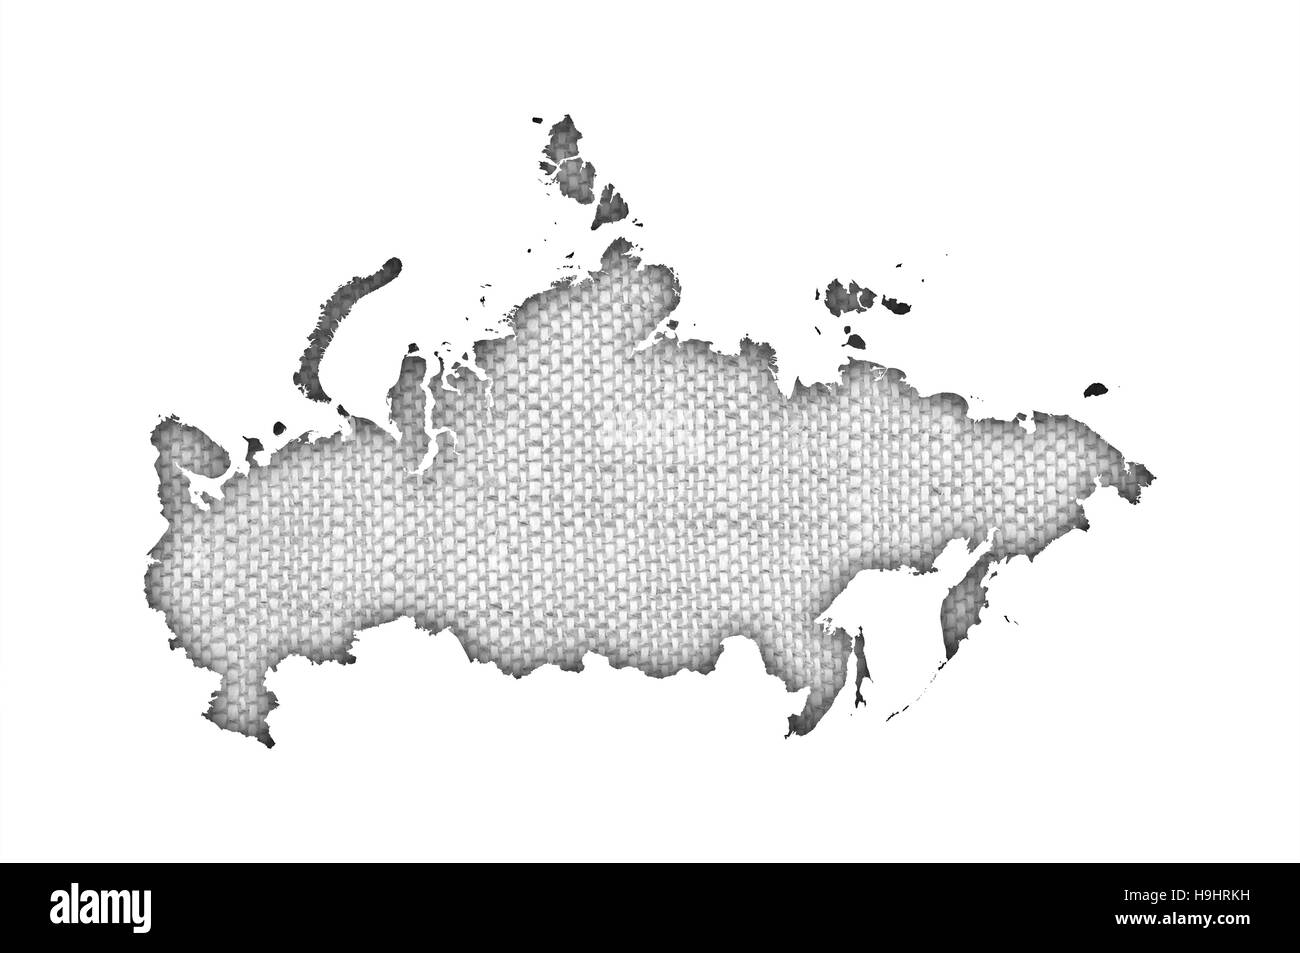 Map of Russia on old linen Stock Photo